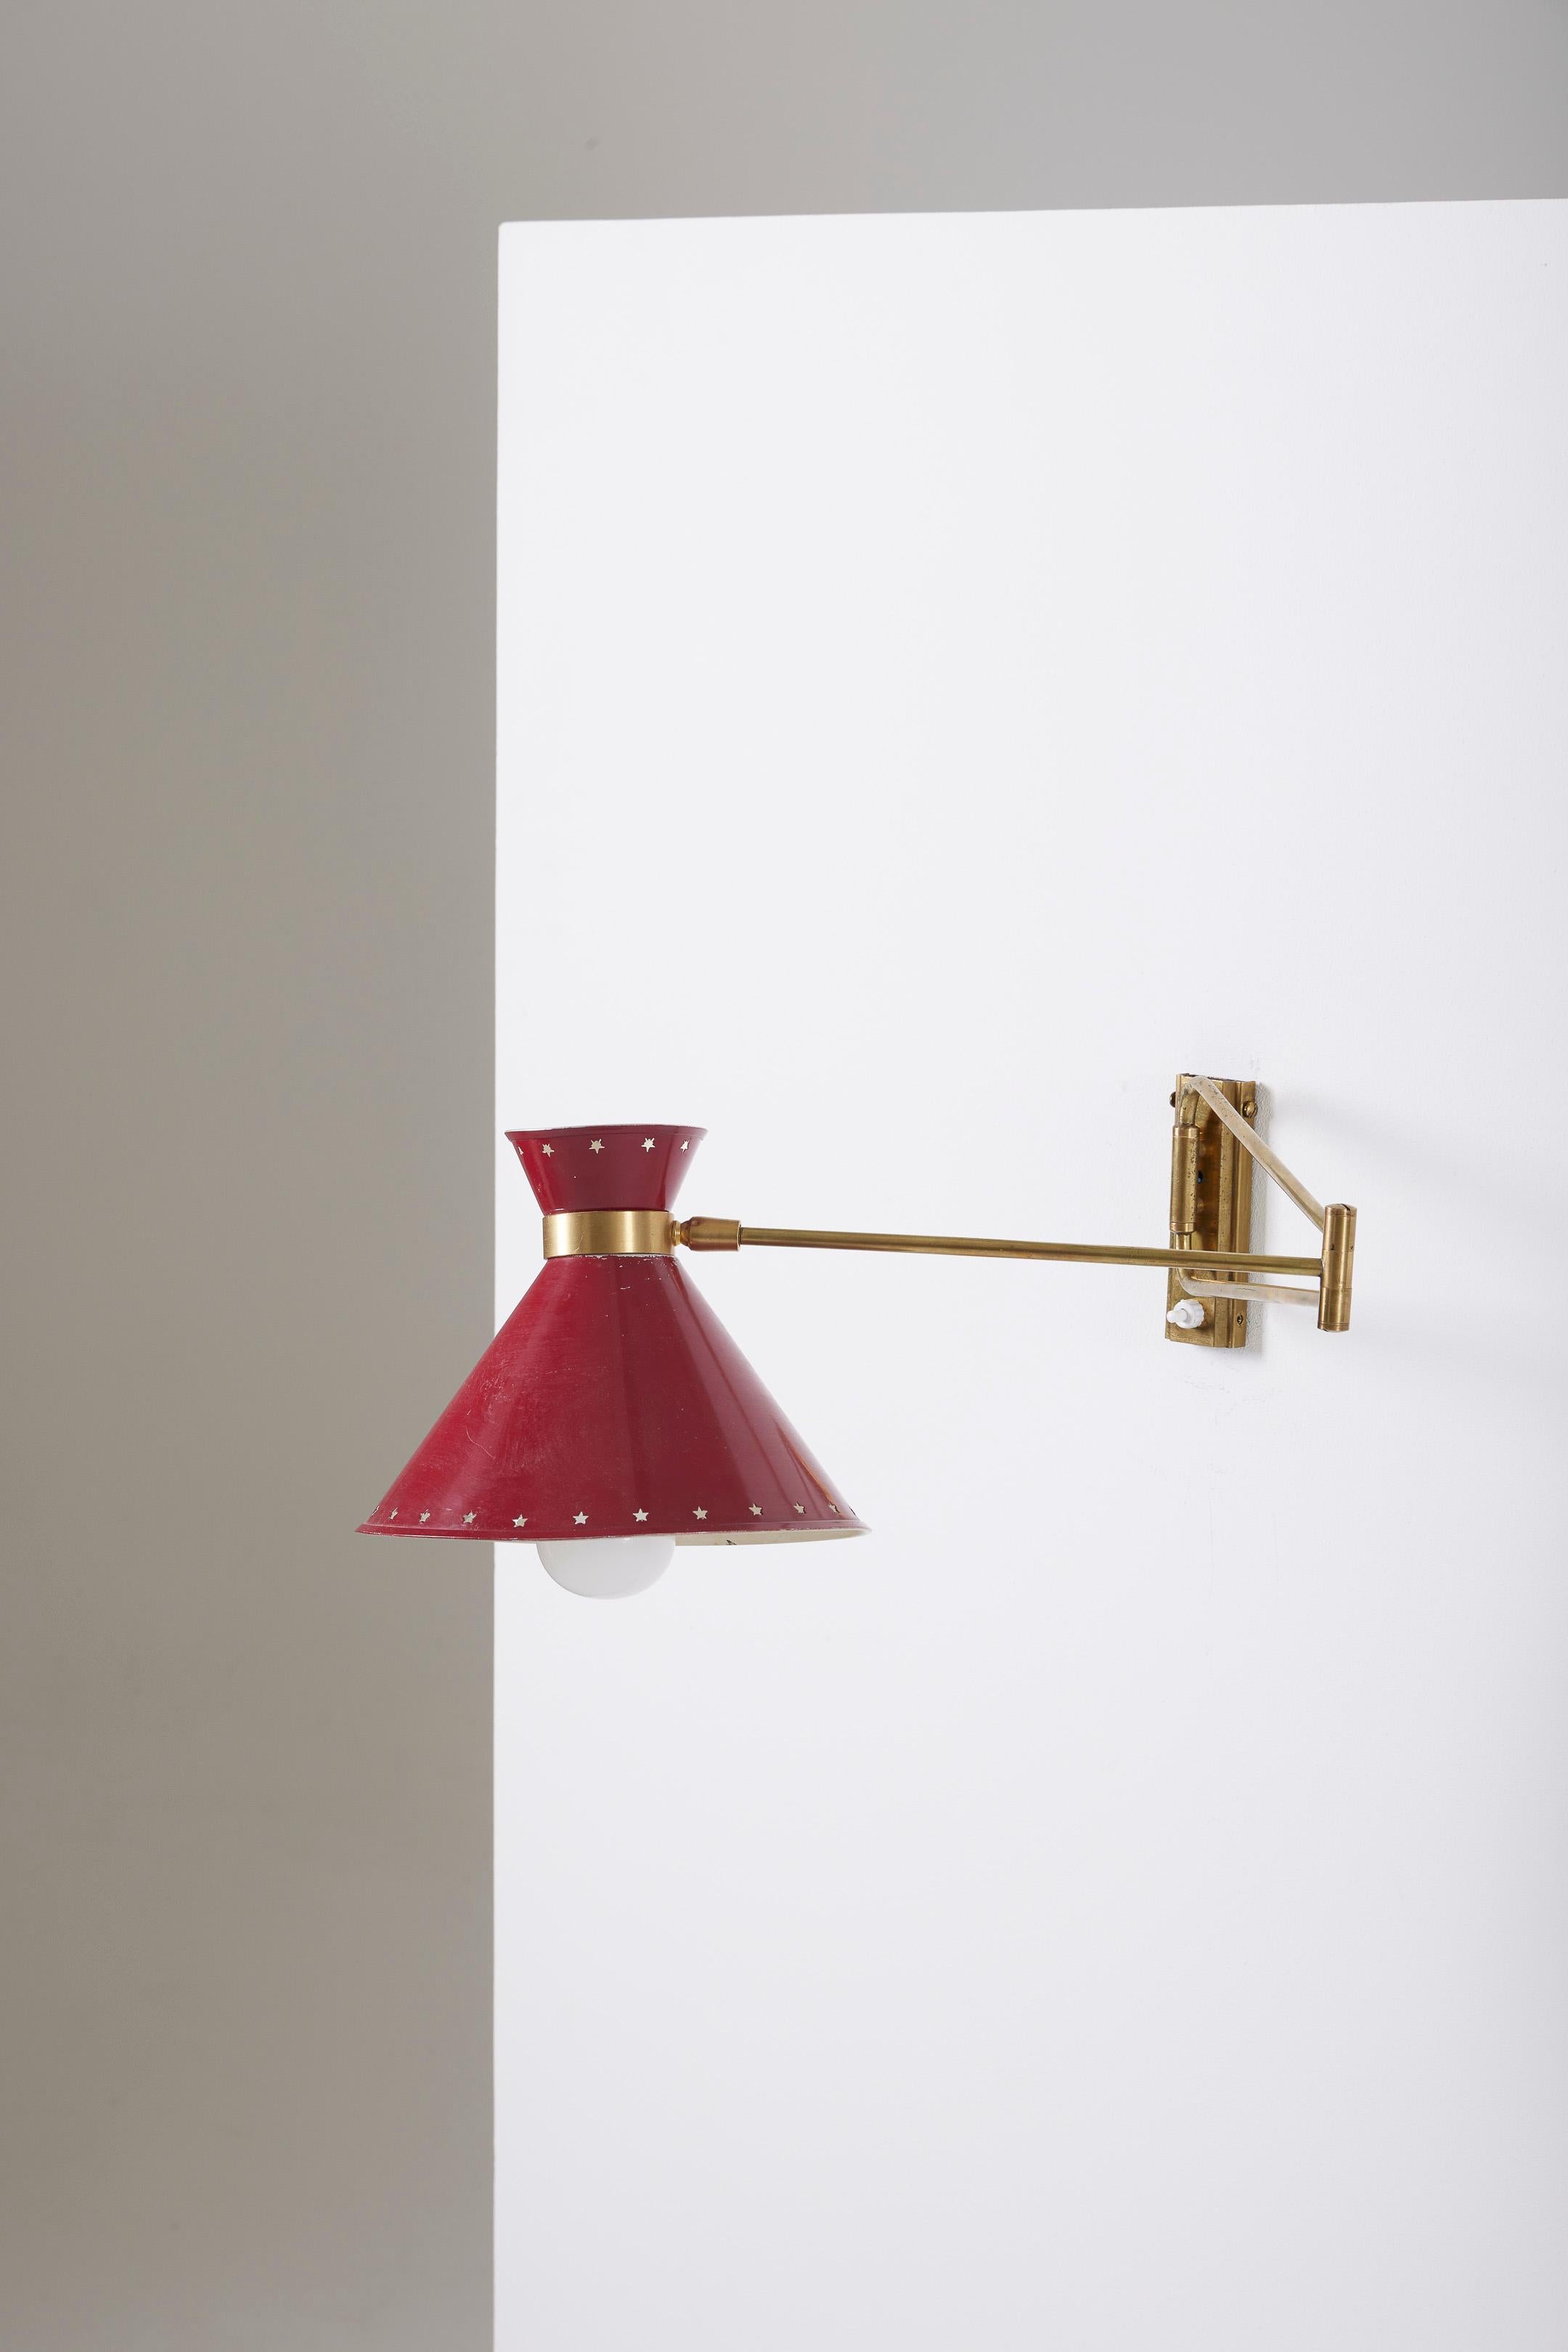 Metal wall sconce by designer René Mathieu for Lunel, dating back to the 1950s. The structure is made of gilded brass, and the diffuser is made of lacquered metal in burgundy red. Very good condition.
LP1252